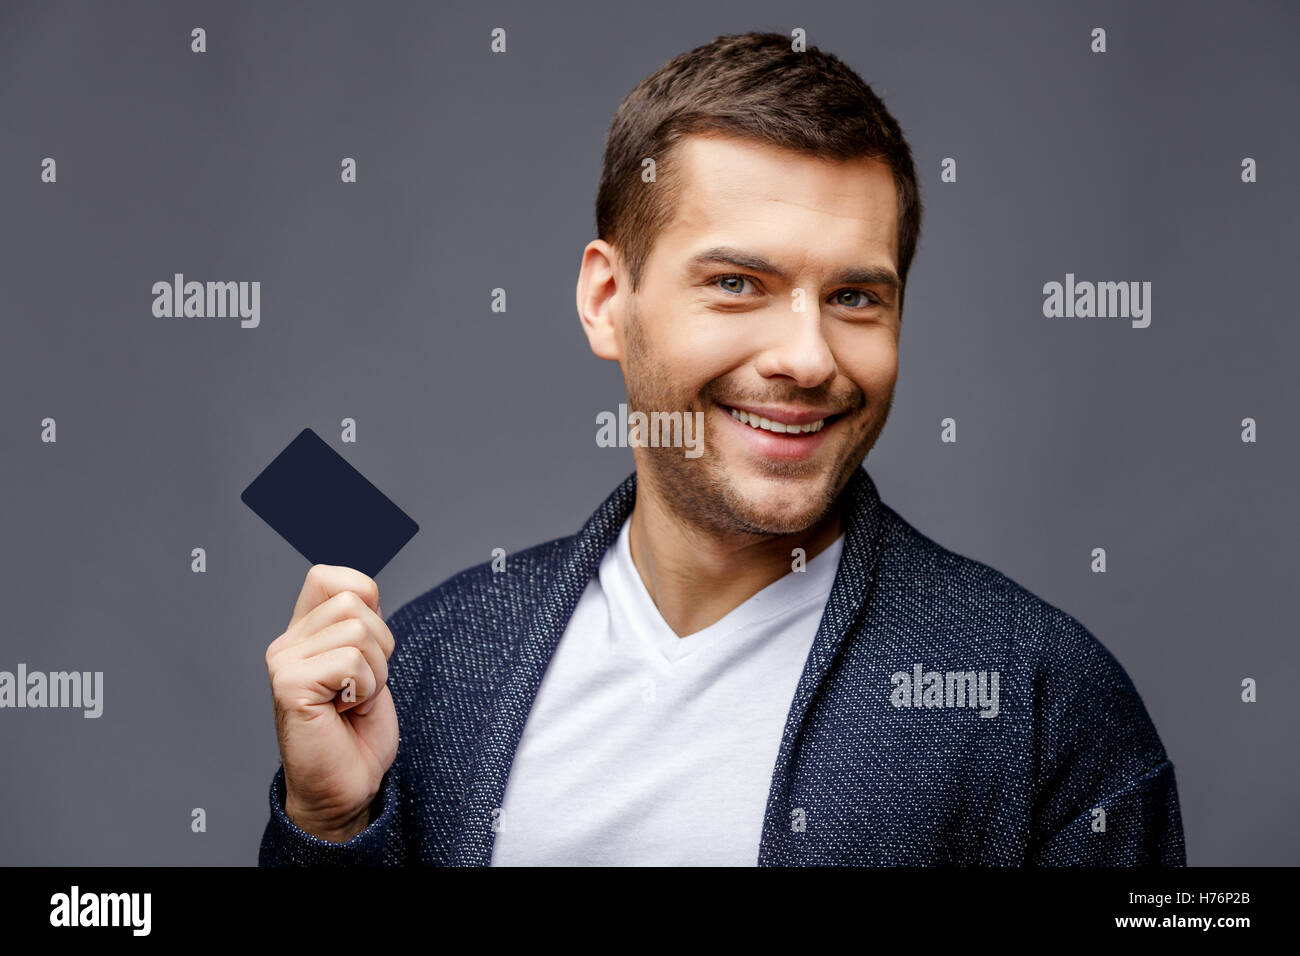 Cheerful young man in smart casual wear Stock Photo